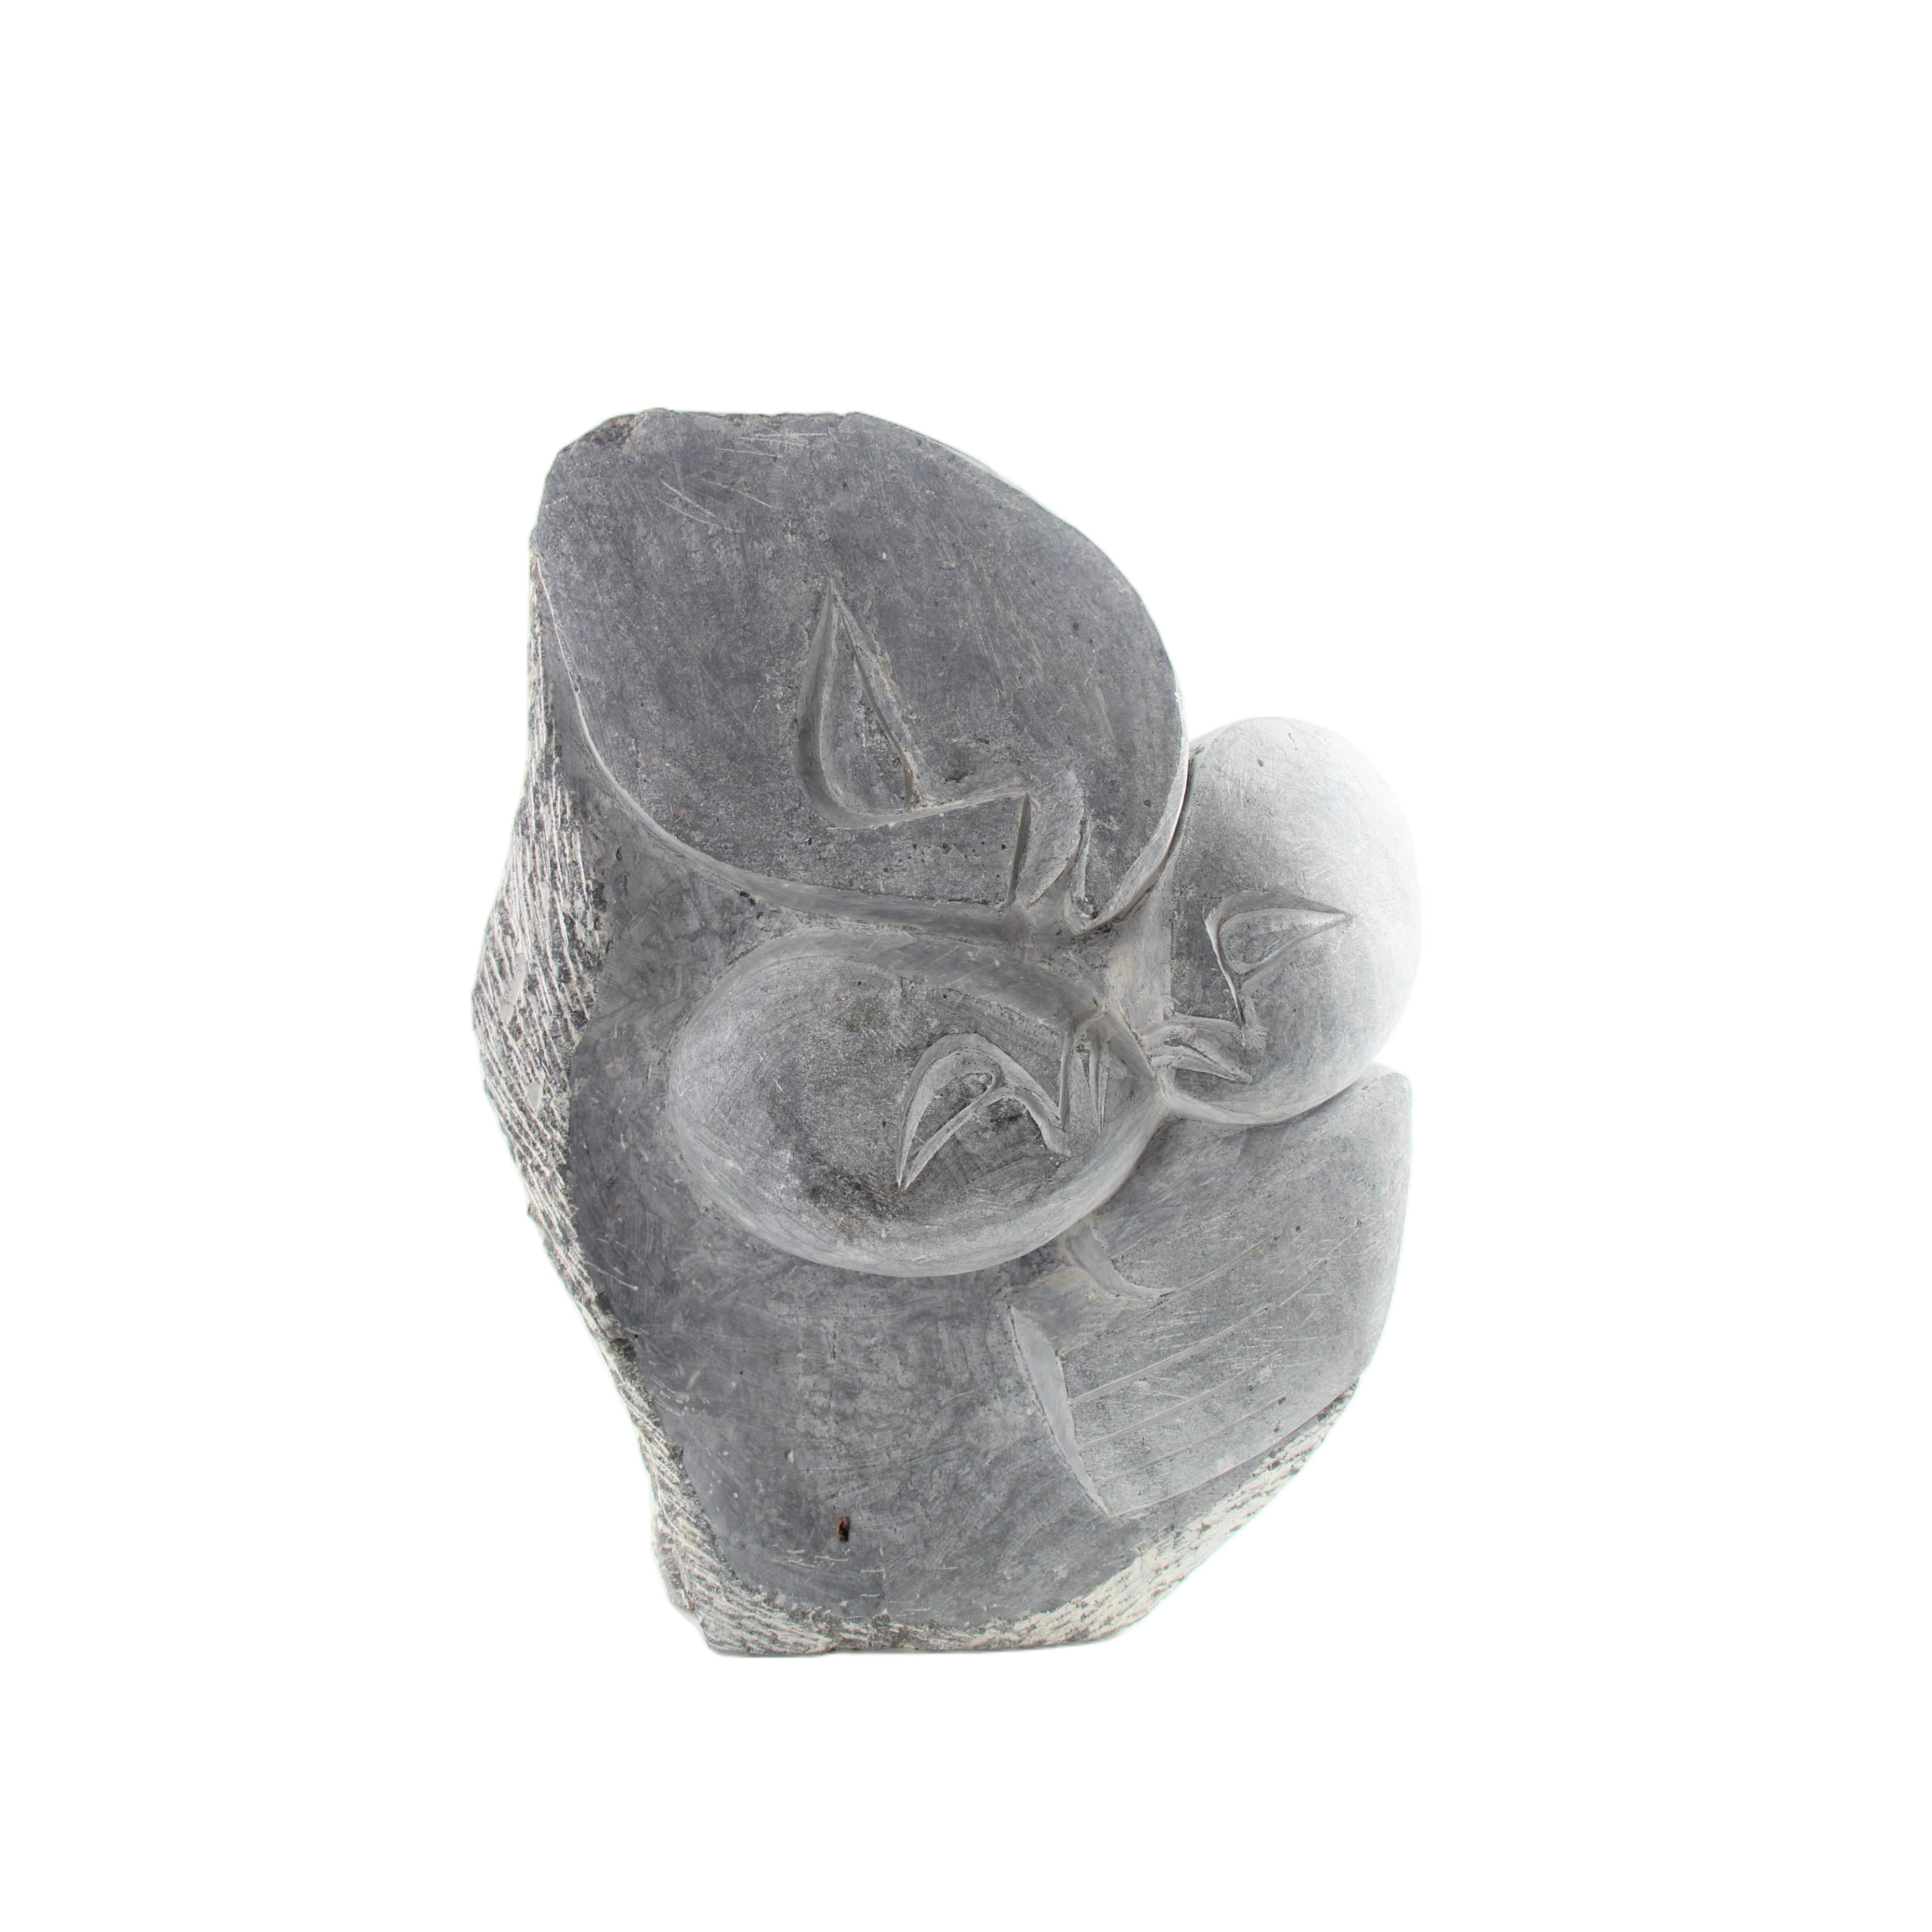 Shona Tribe Serpentine Stone Mother and Children ~11.0" Tall - Mother and Children